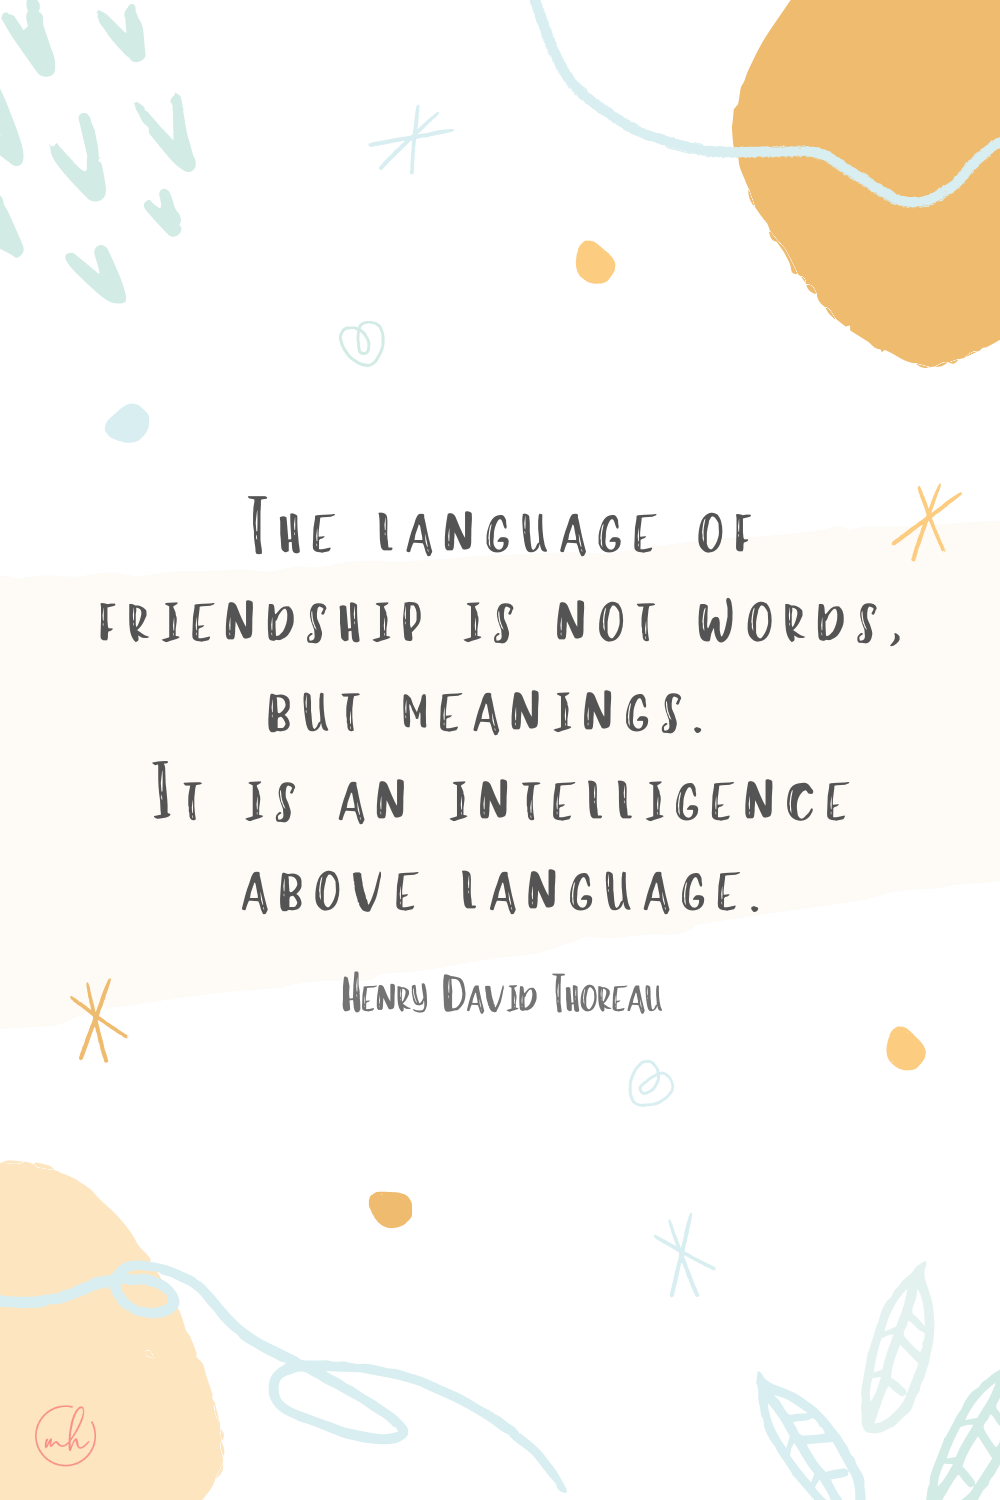 "The language of friendship is not words, but meanings. It is an intelligence above language." - Henry David Thoreau